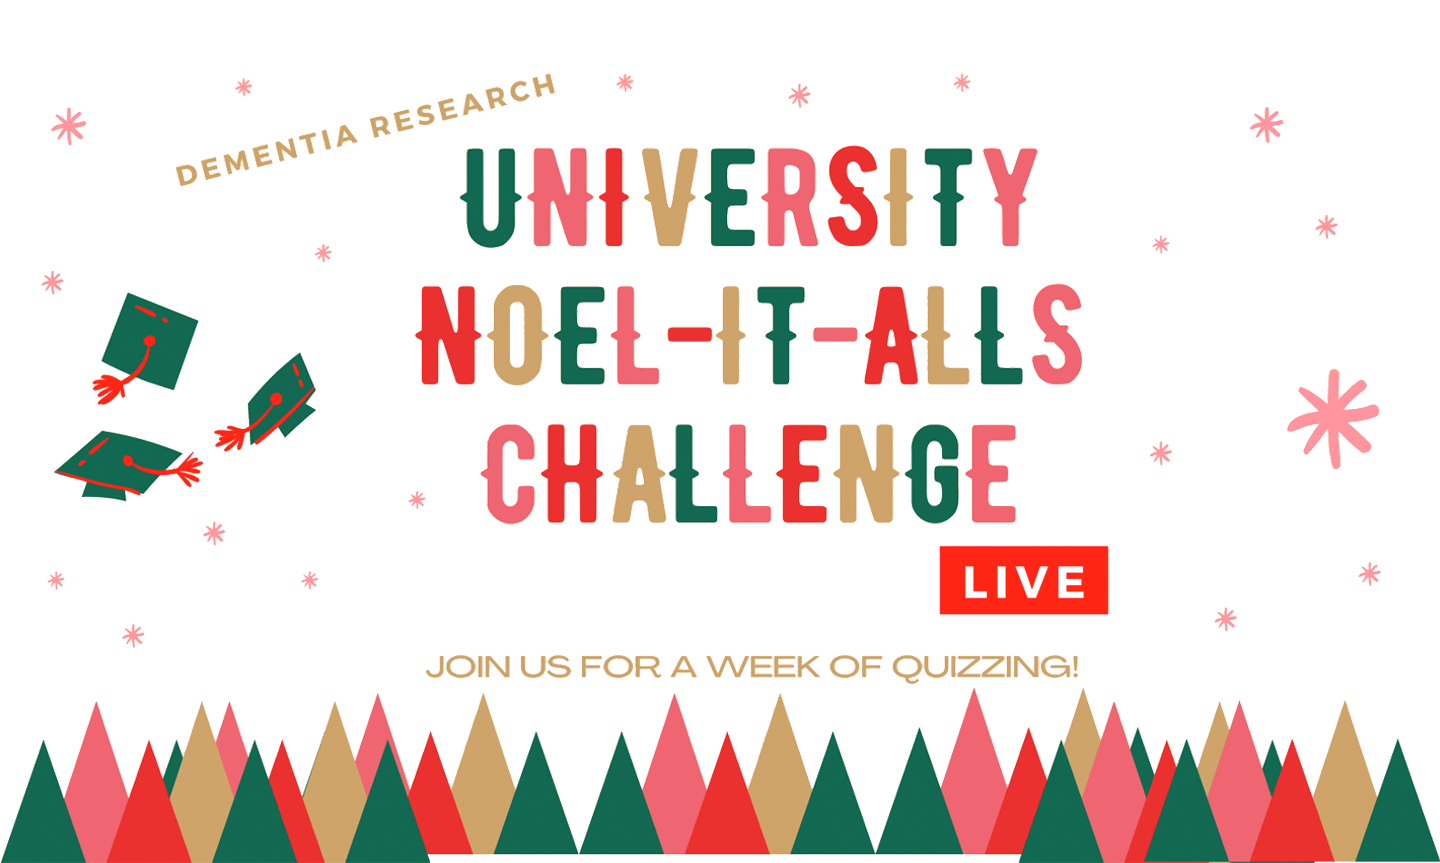 University Noel-it-alls Challenge LIVE - Join us for a week of quizzing!